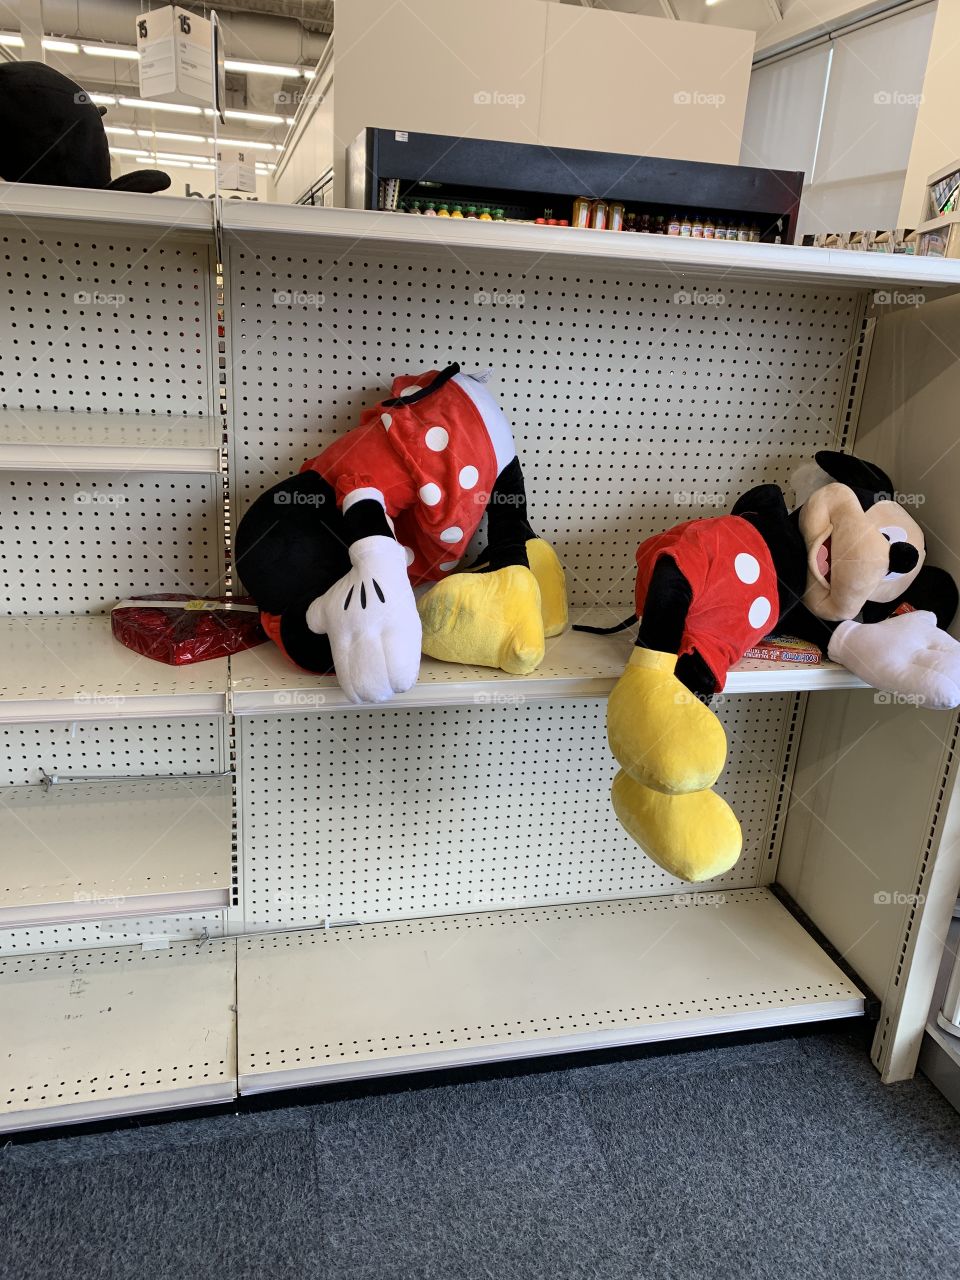 Mickey and Minnie Mouse plush toys sadly slumped on empty shelves. 